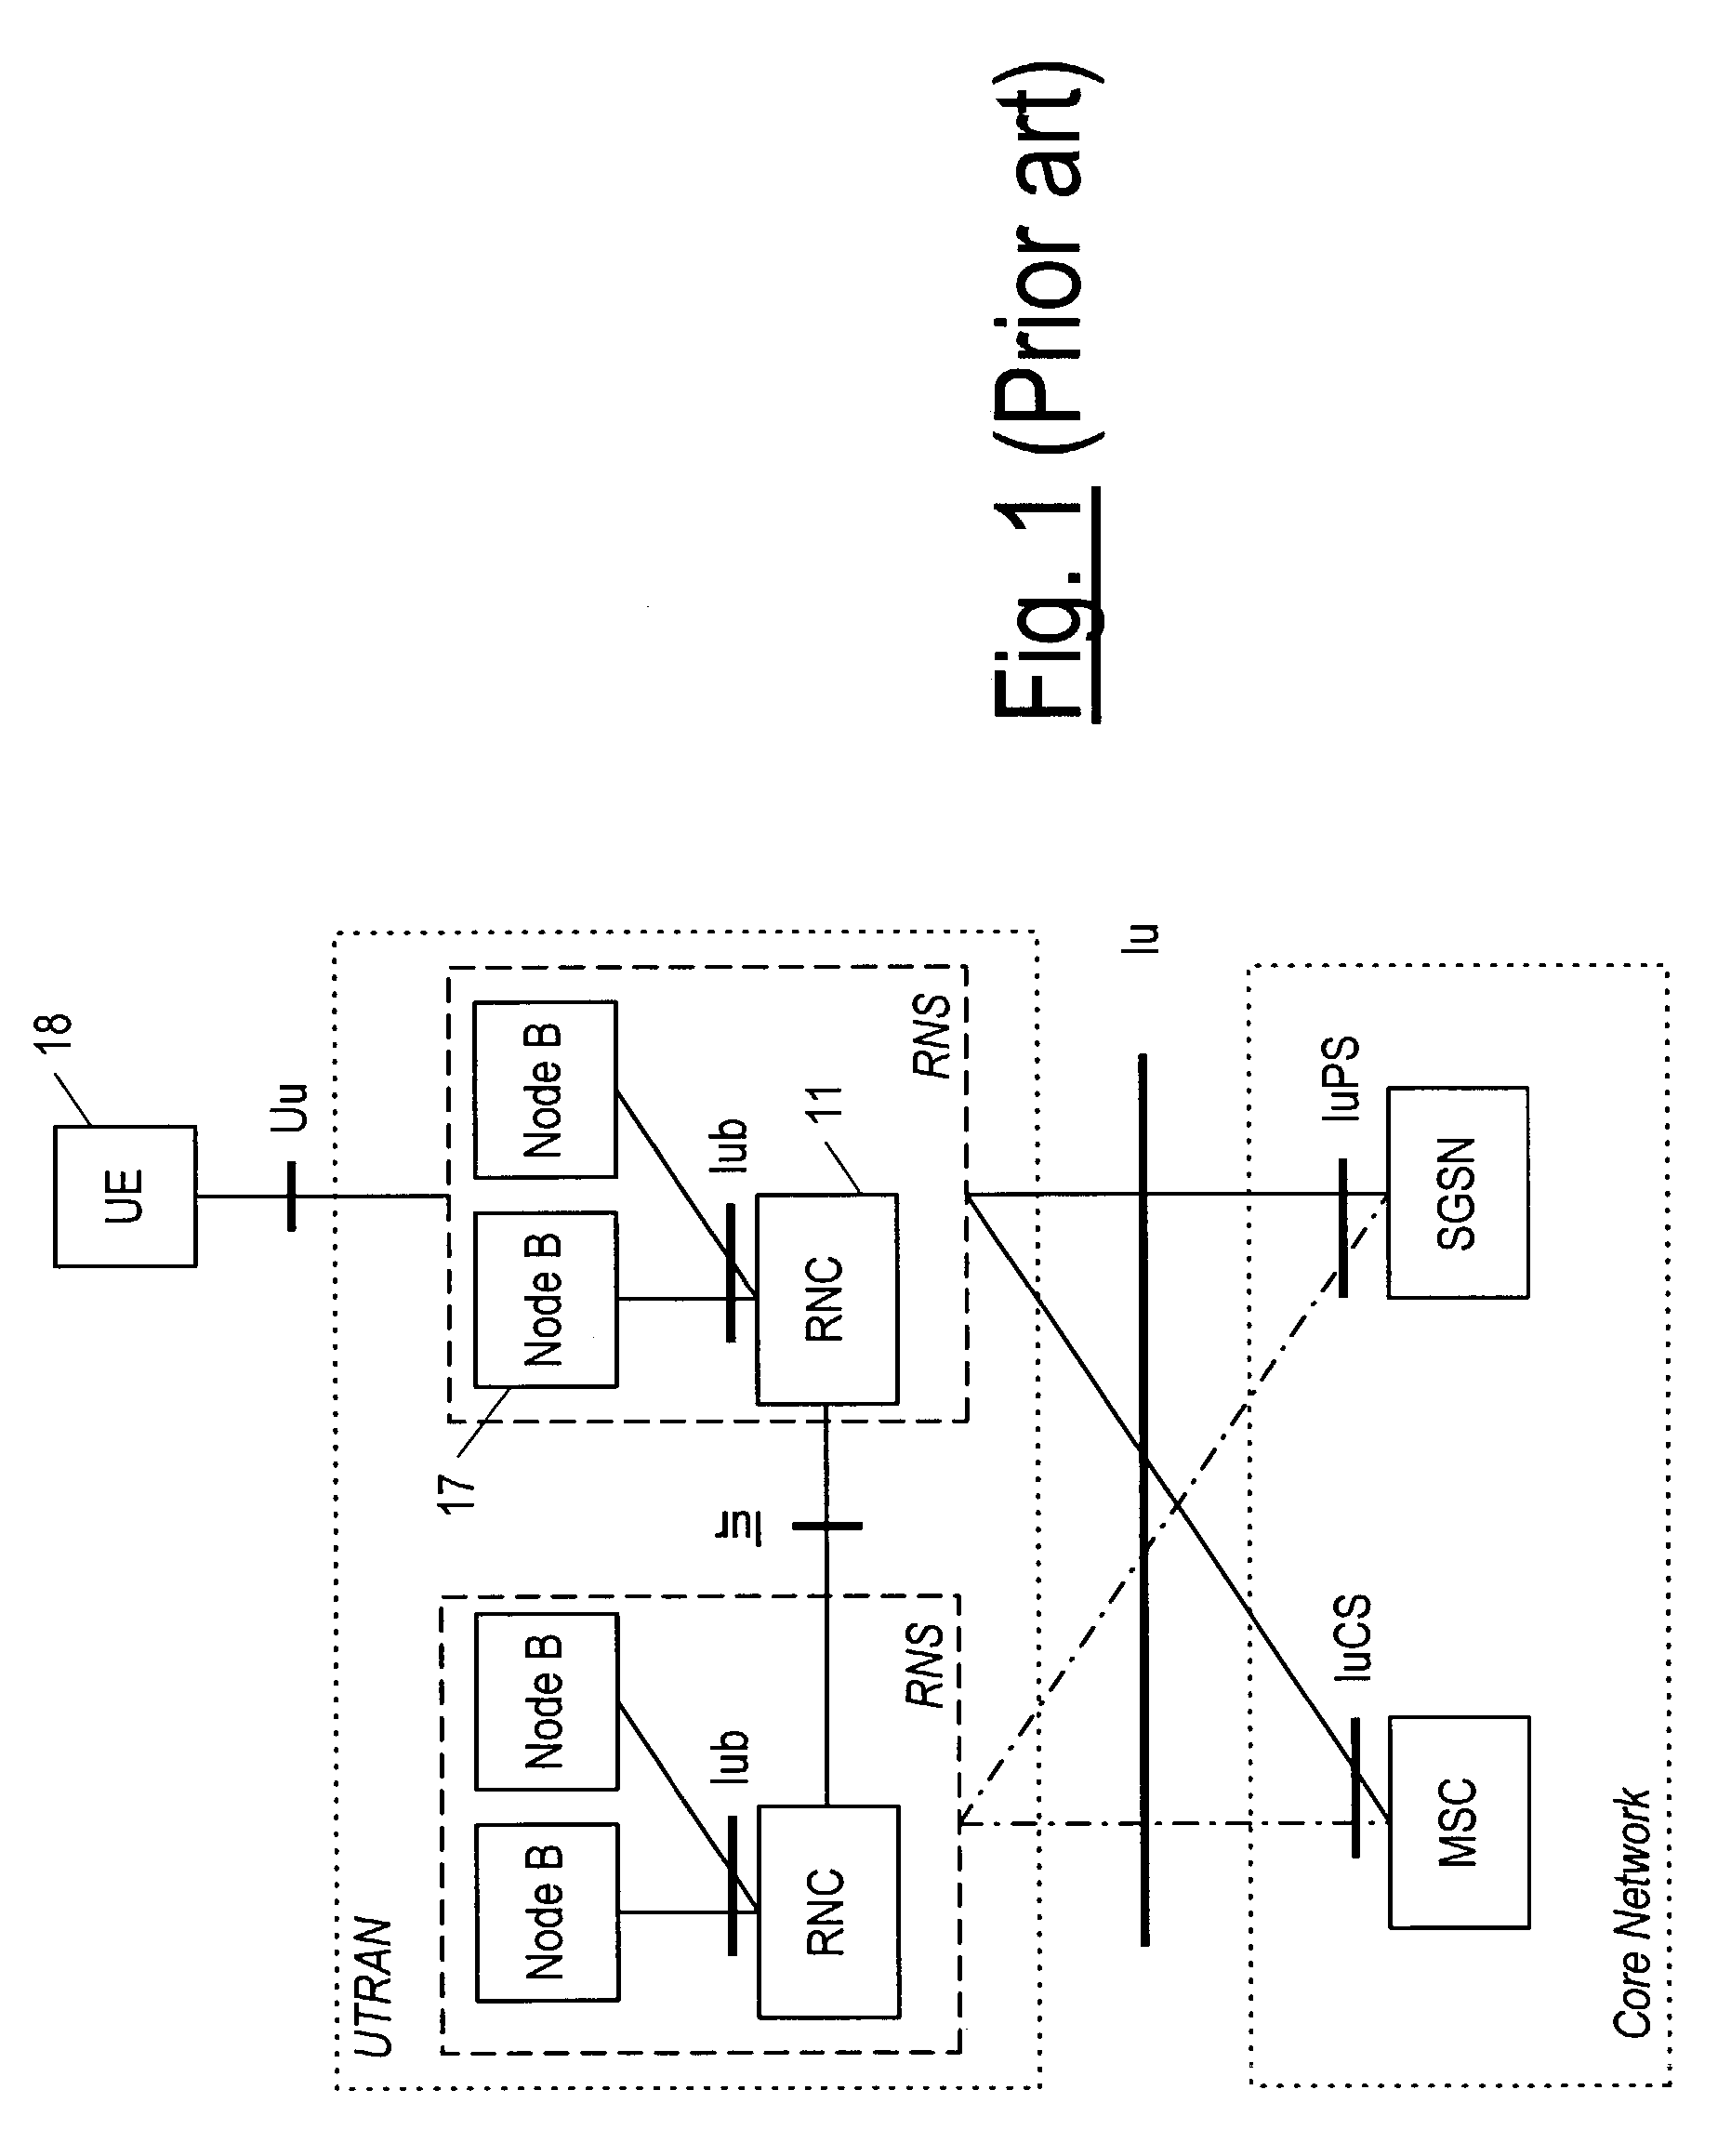 Method and apparatus for cell-specific HSDPA parameter configuration and reconfiguration